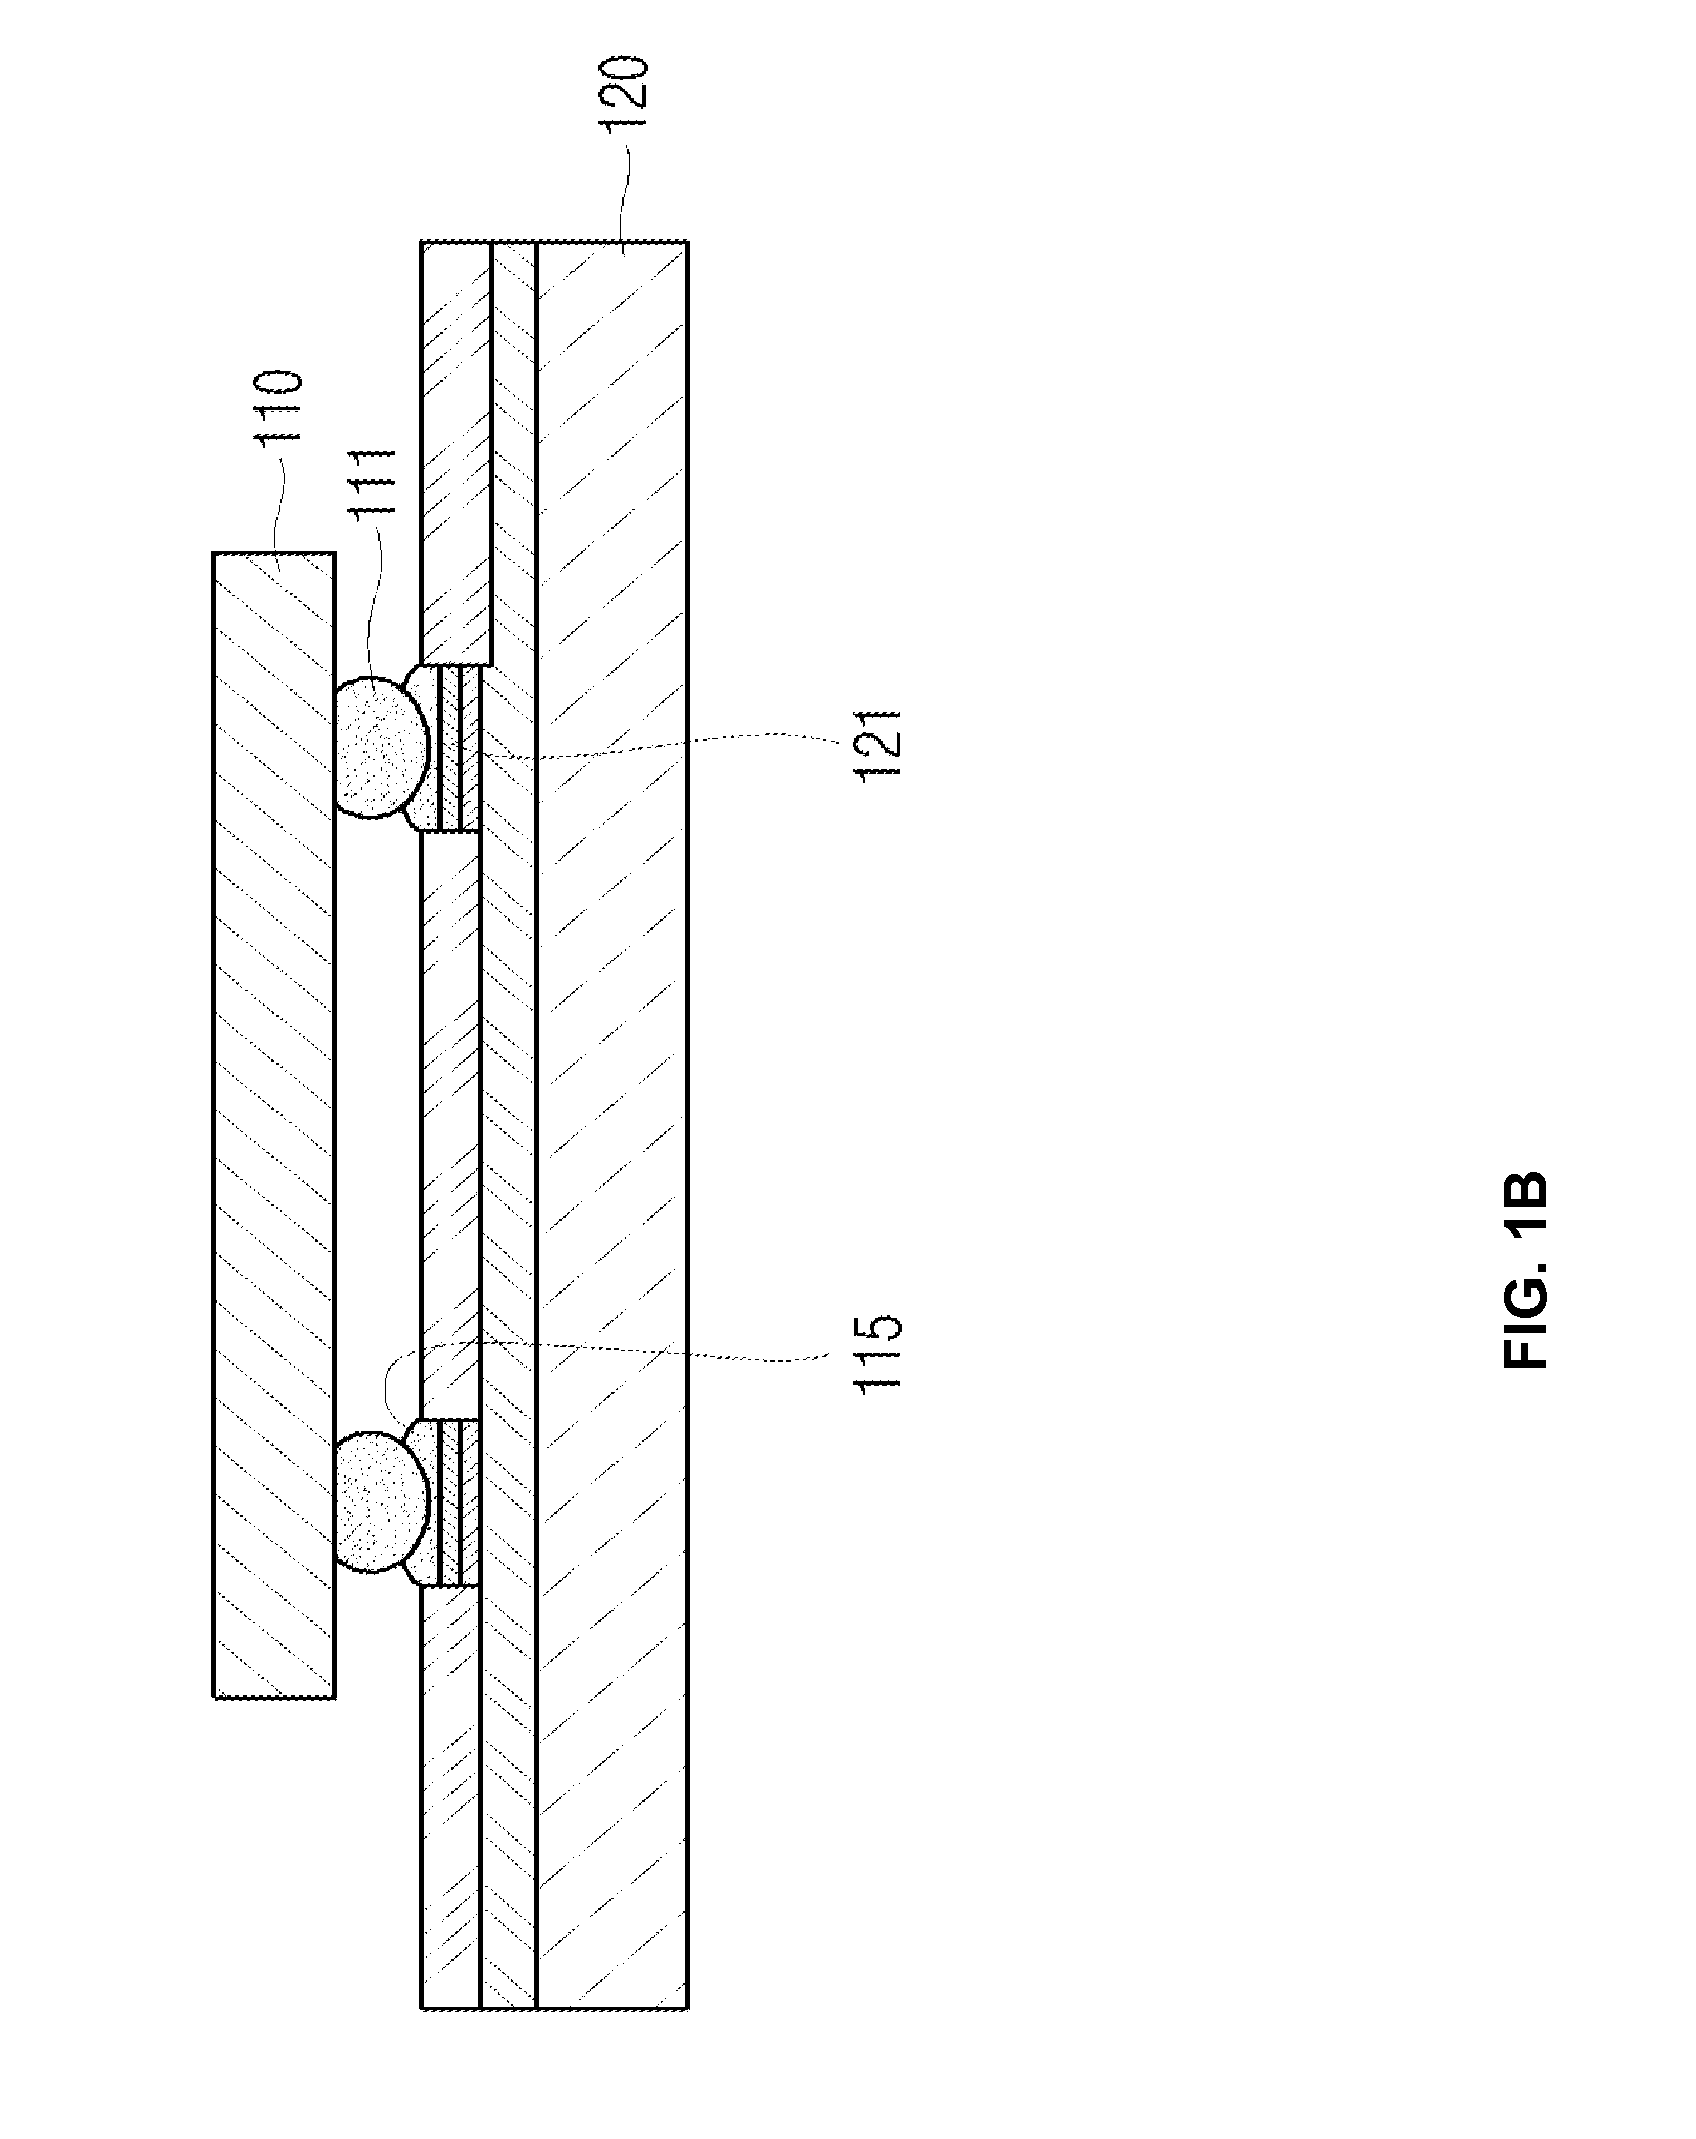 Laser assisted bonding for semiconductor die interconnections